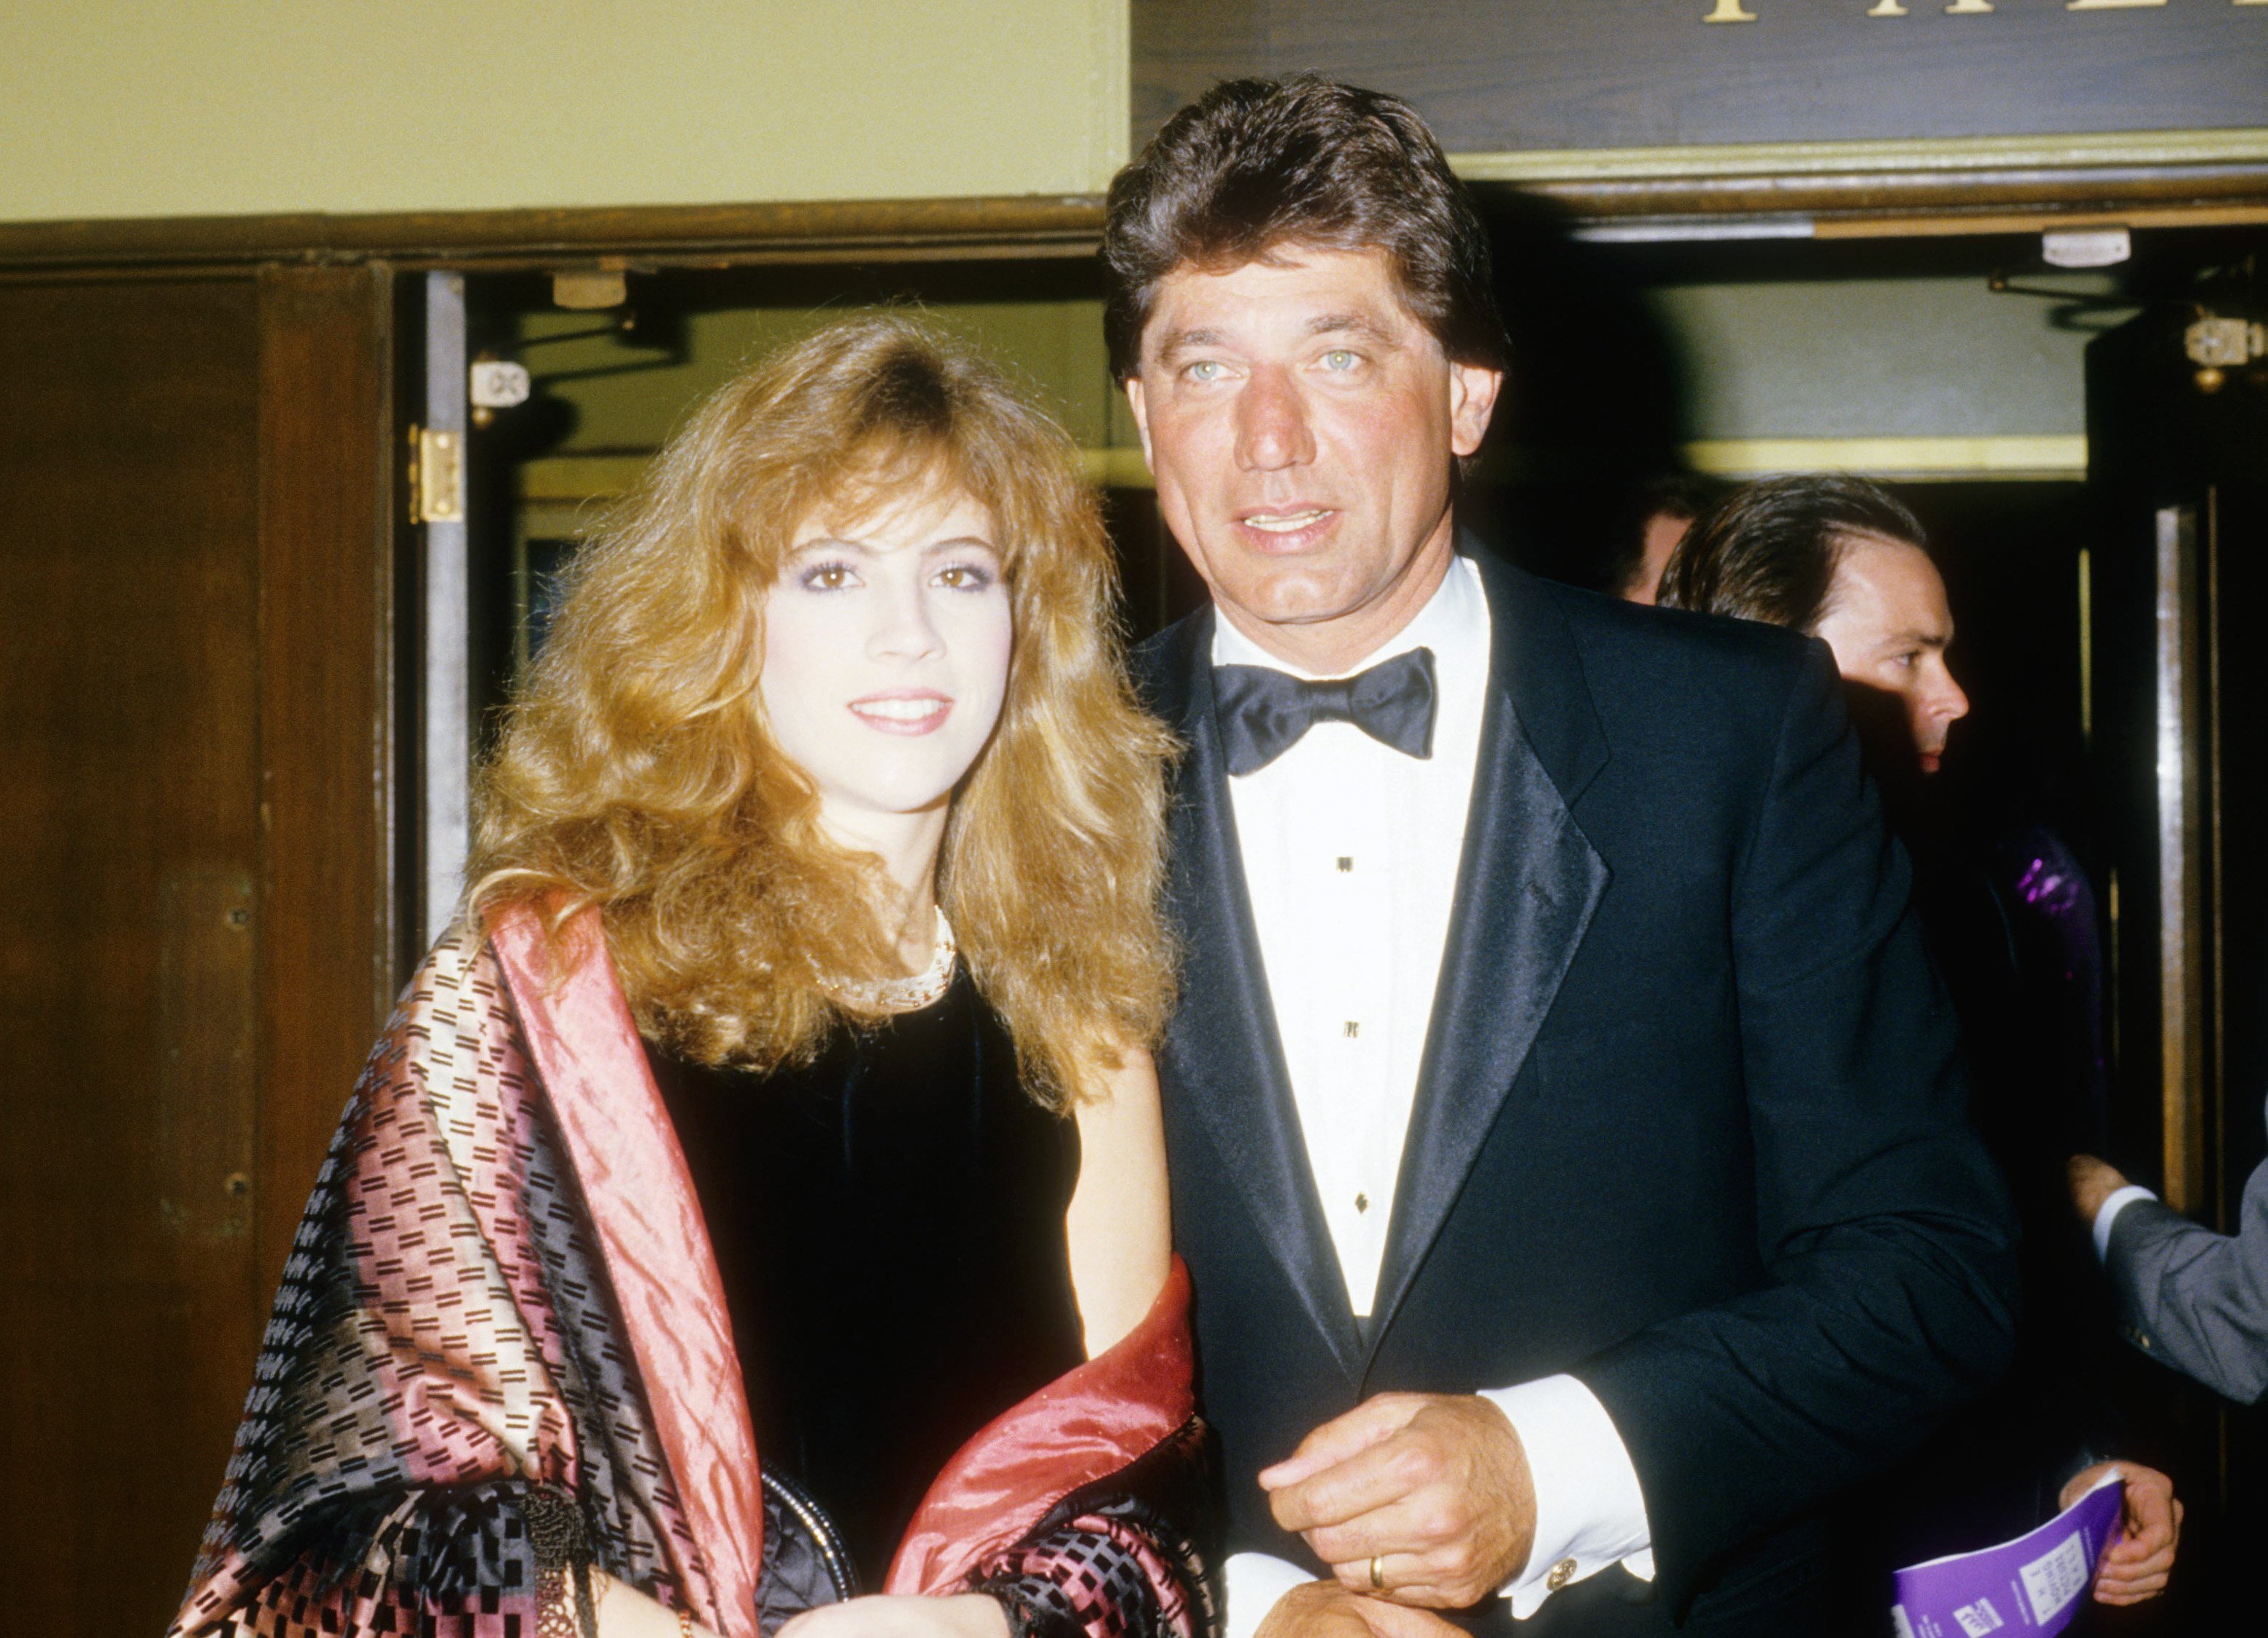 Former NFL quarterback Joe Namath and his ex-wife Deborah Mays pose for a photo at an undisclosed location during the 1980's. | Source: Getty Images